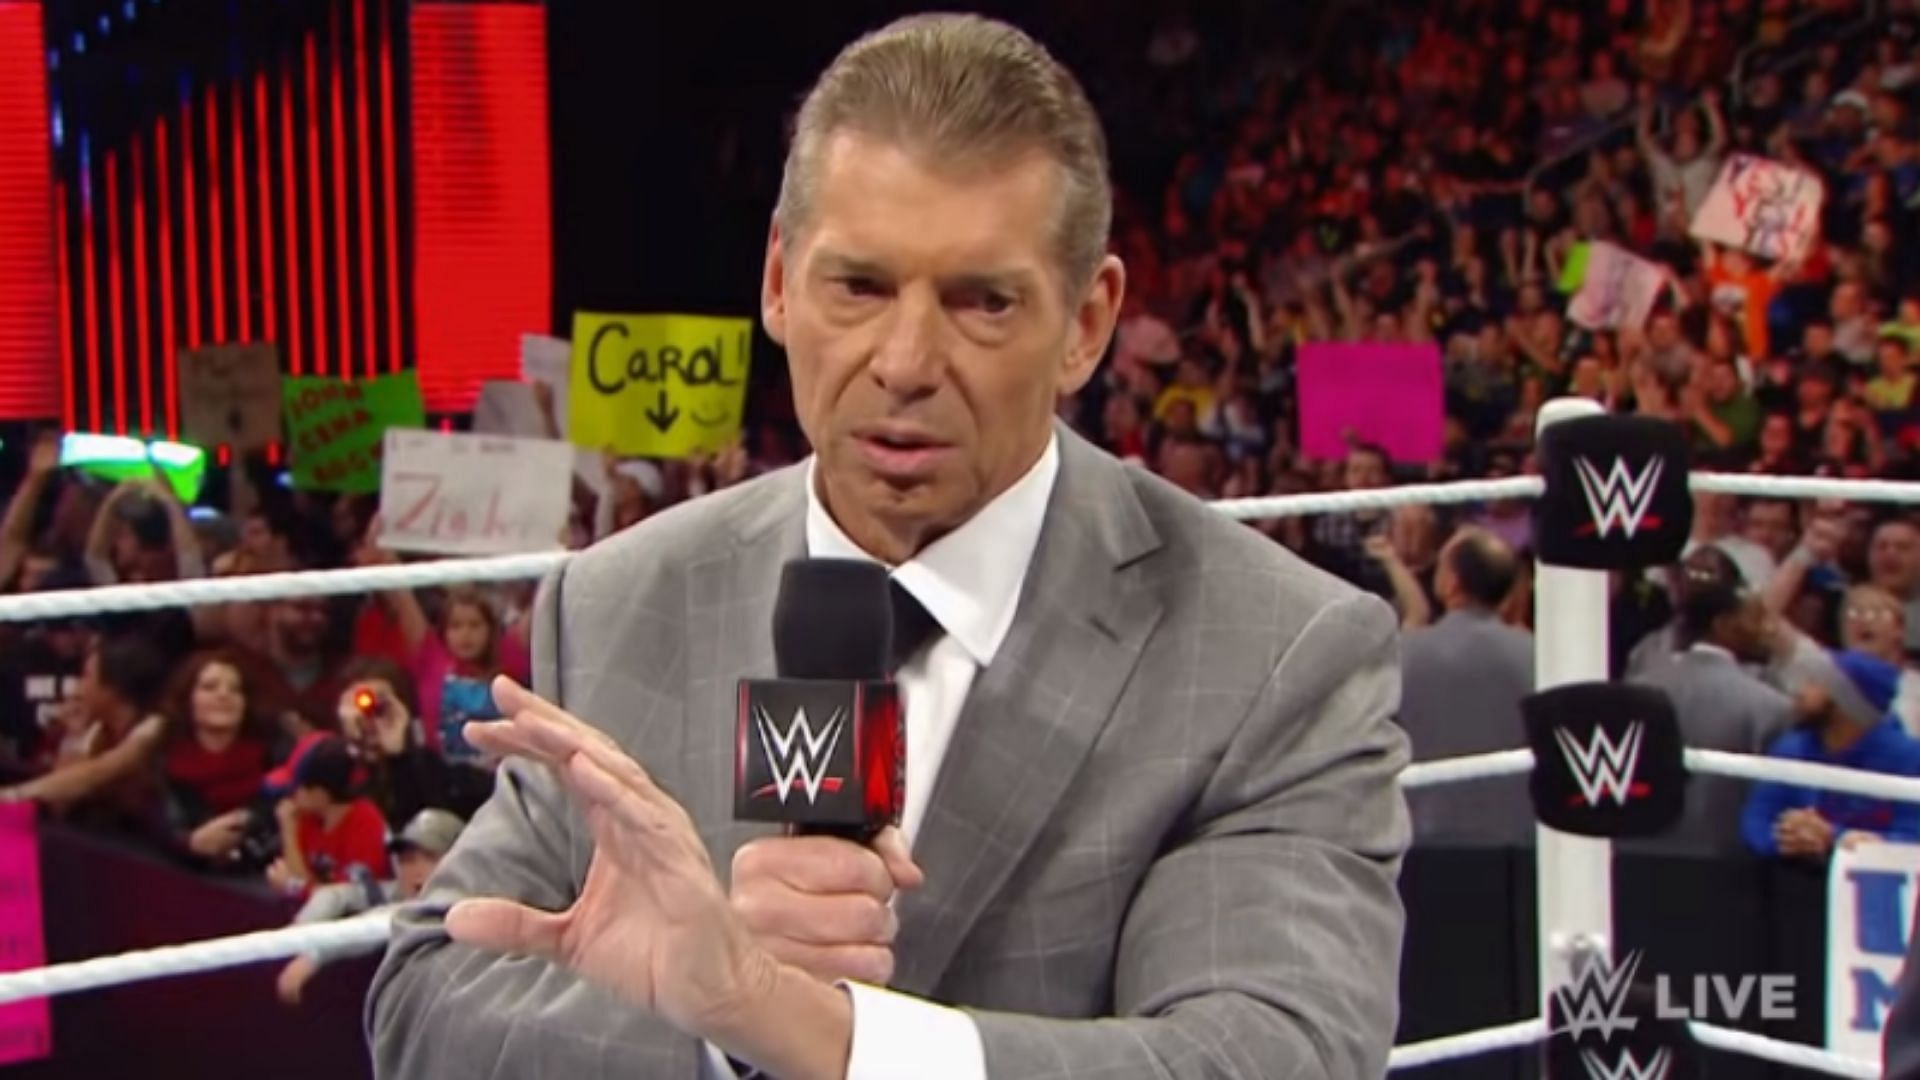 Vince Russo used to write WWE storylines for Vince McMahon